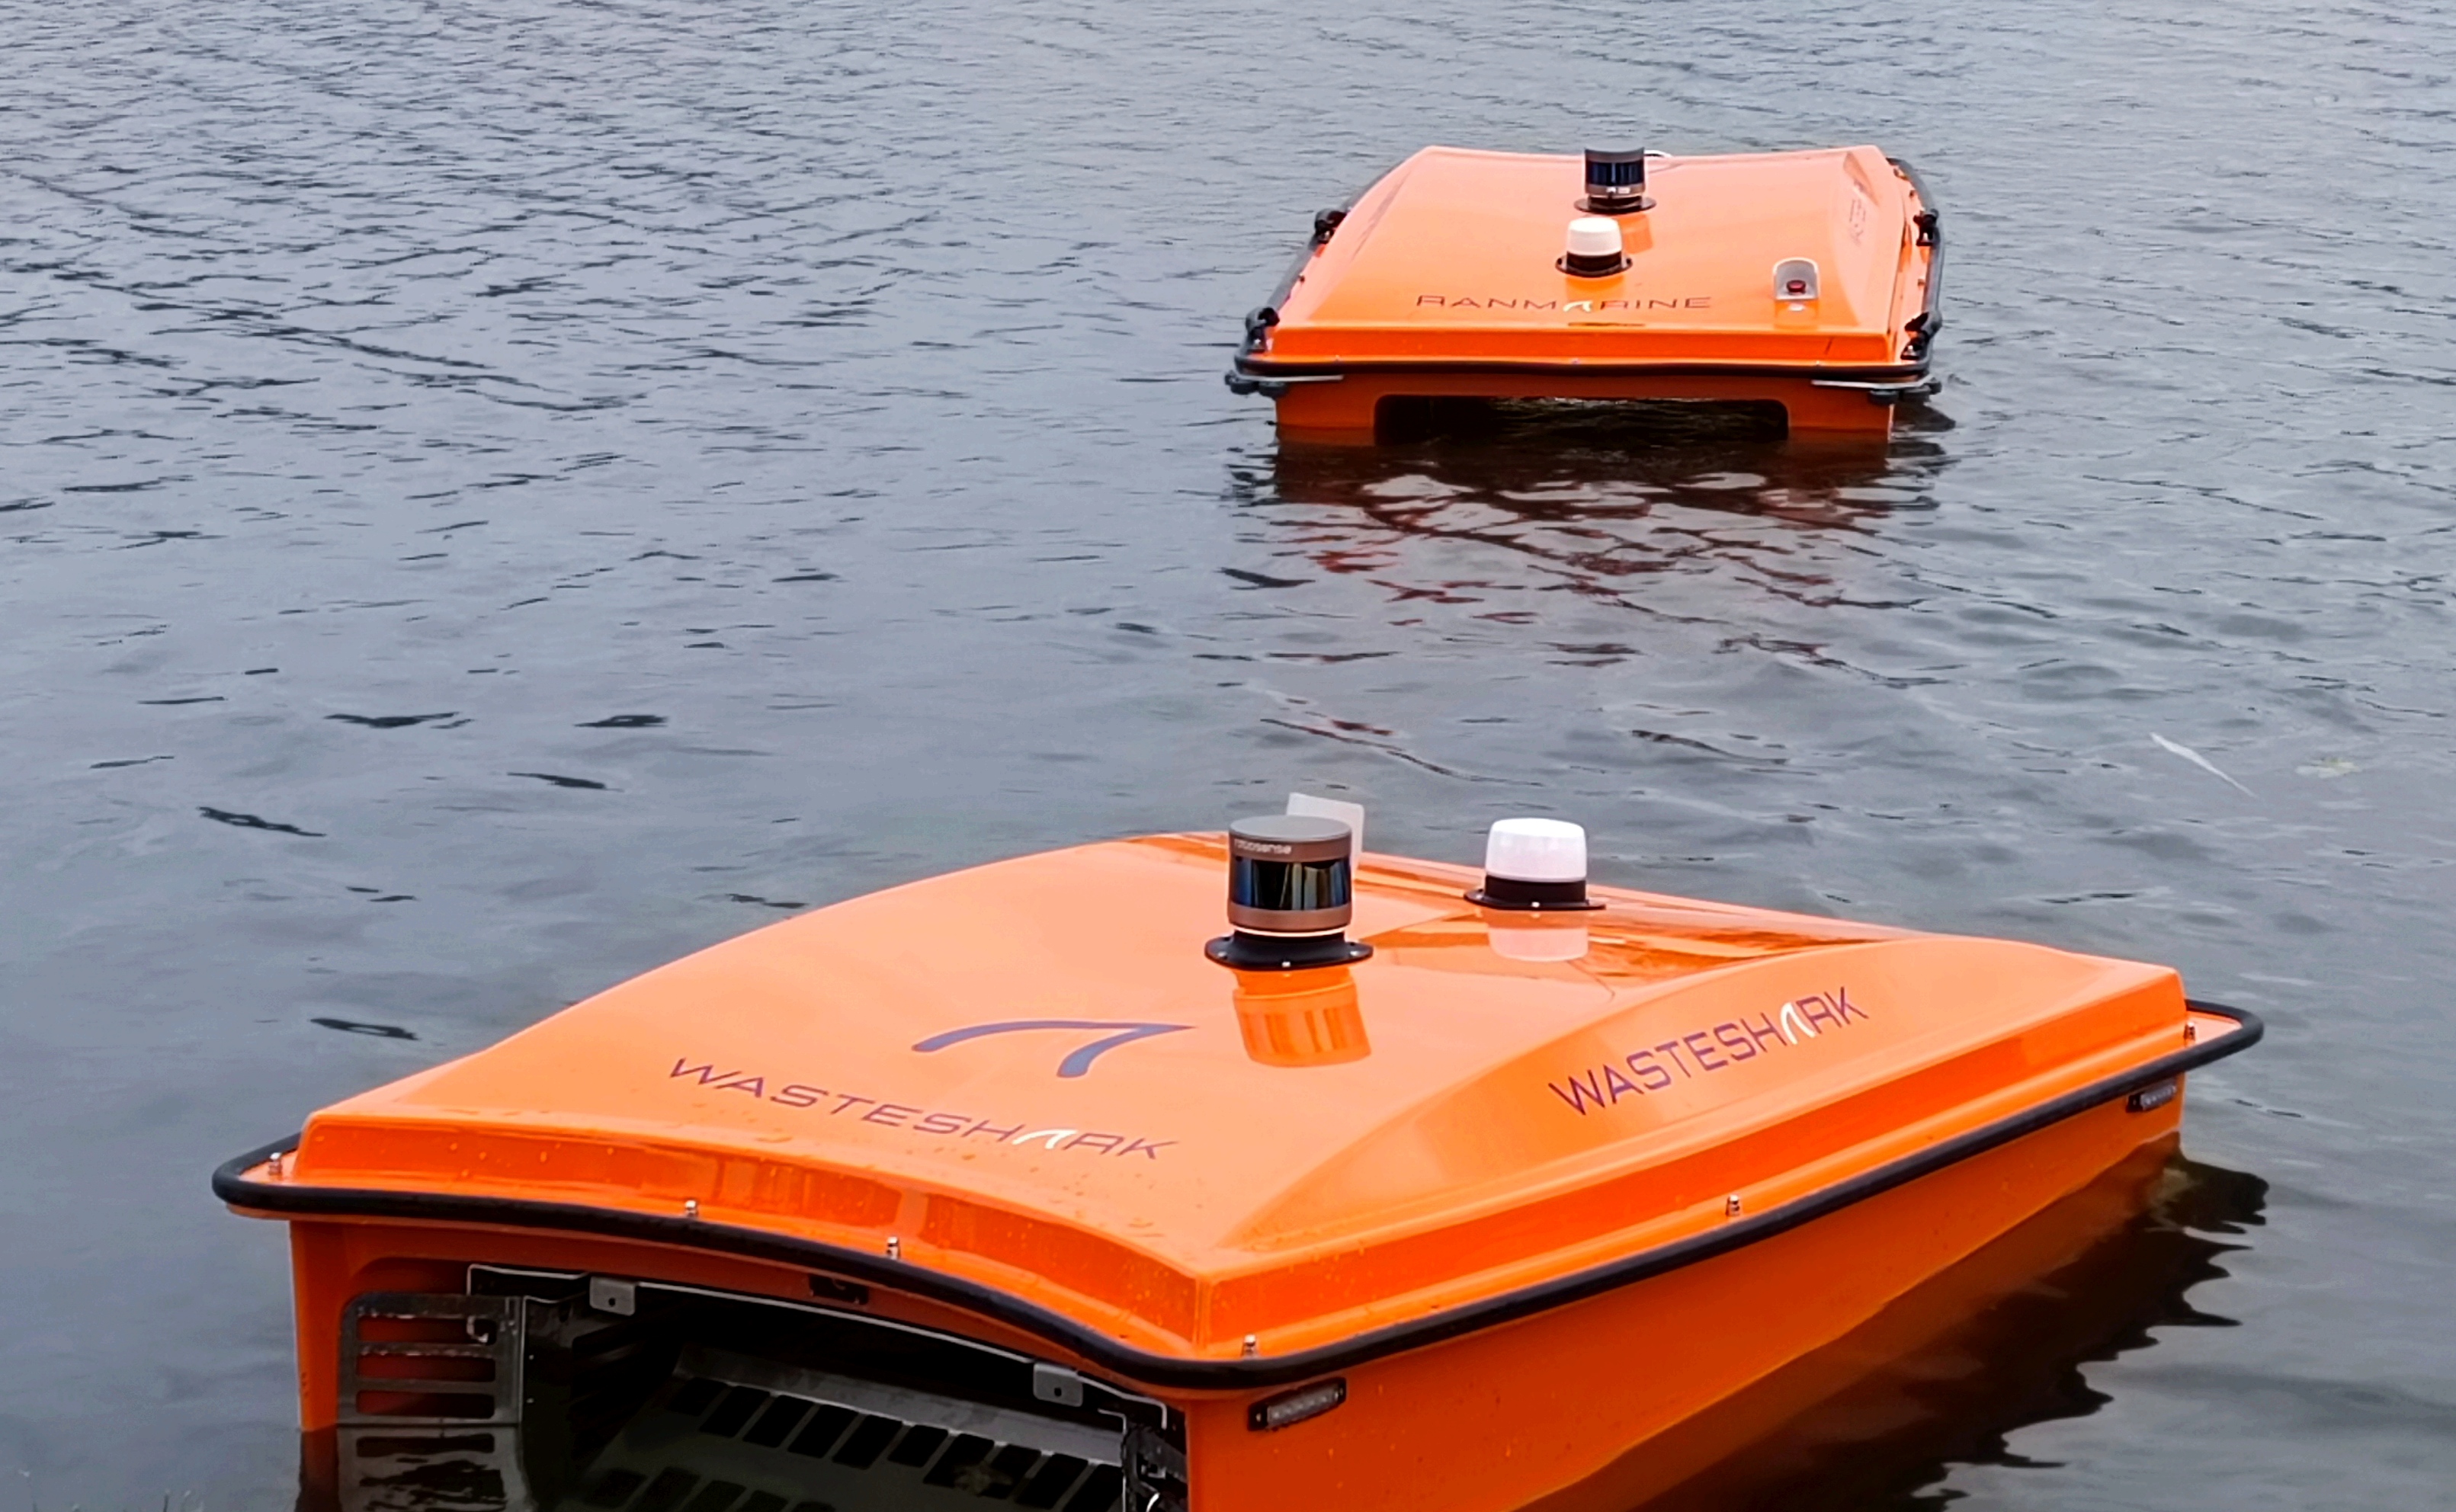 WasteShark by RanMarine, WasteShark, the world’s first autonomous aquadrone that cleans pollution from waterways and collects data about water quality.